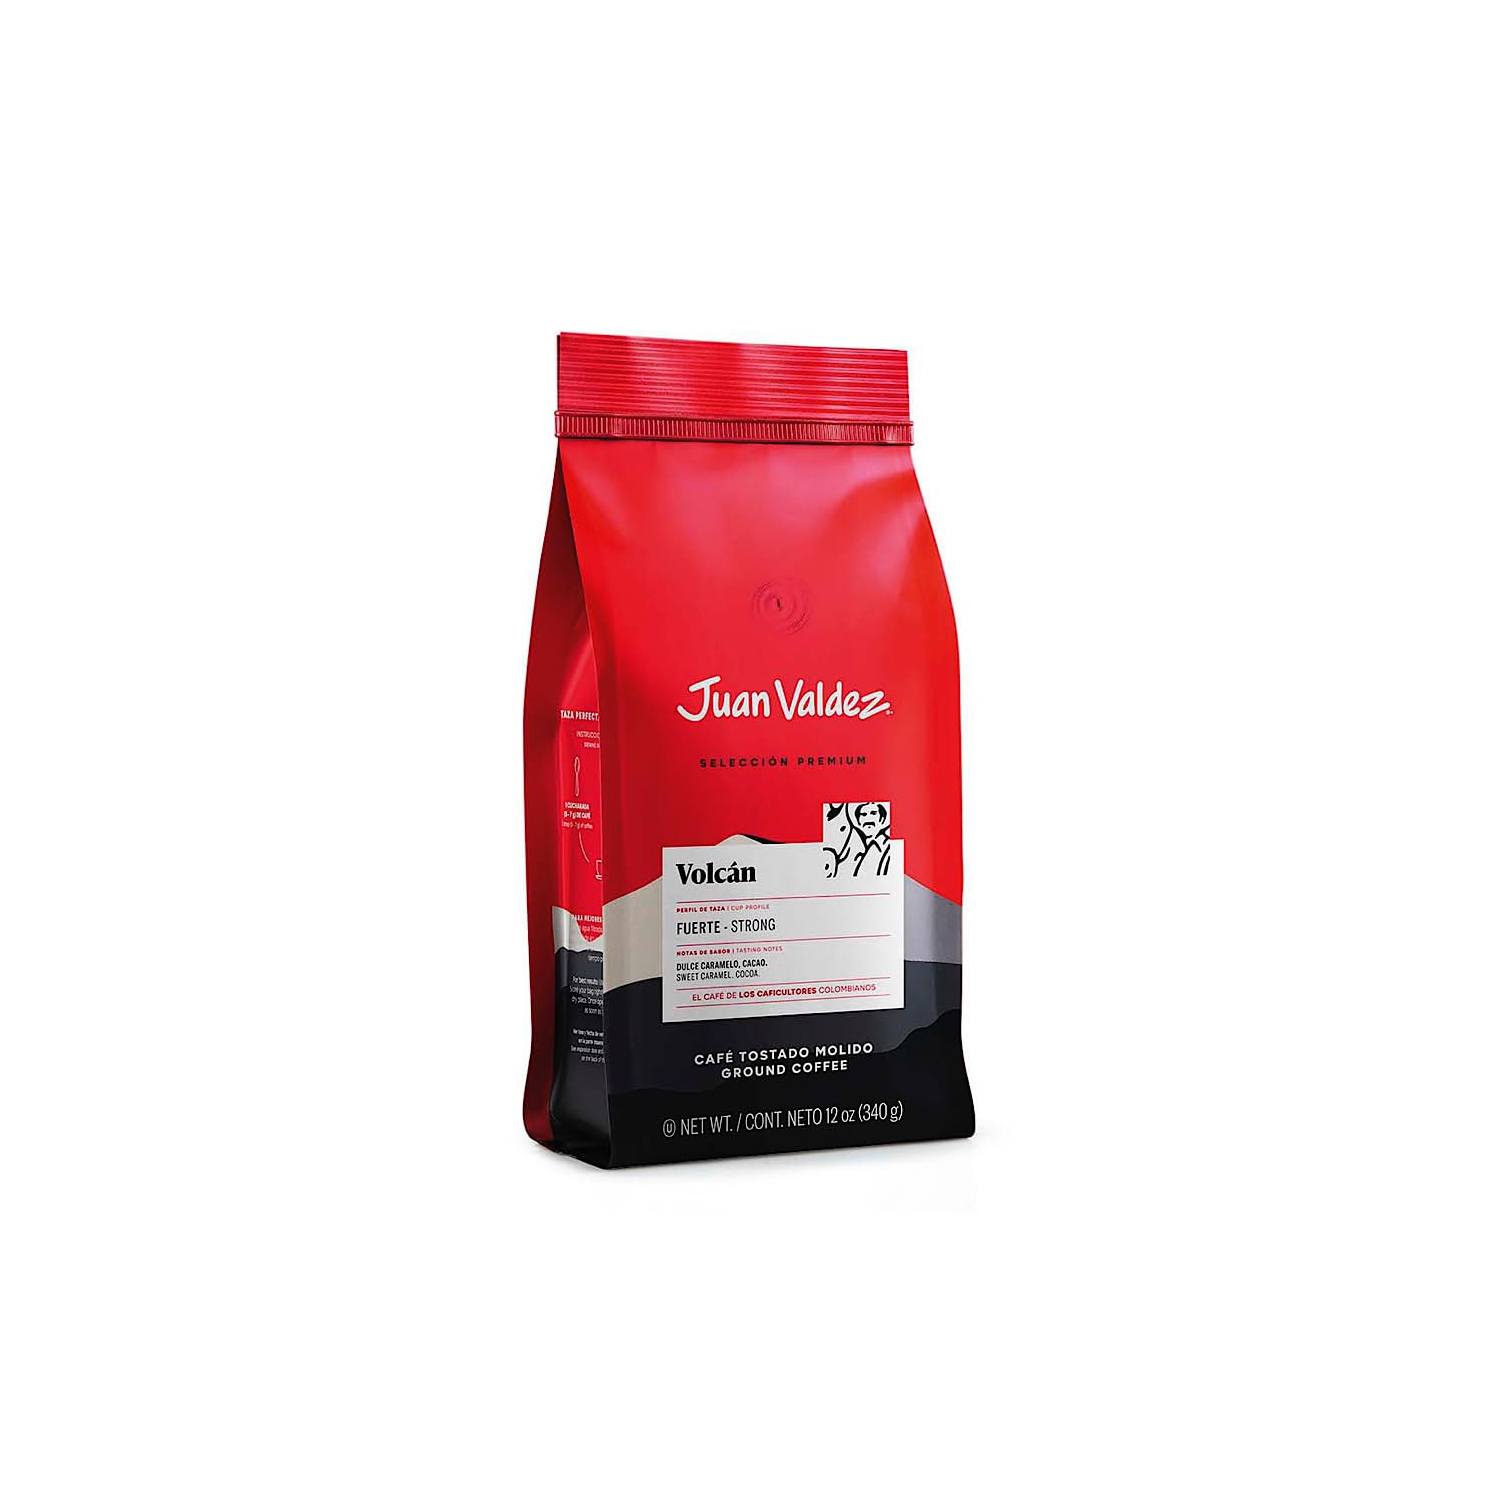 Juan Valdez Volcan Ground Colombian Coffee 12 oz, Premium Line, Strong Coffee with Notes of Sweet caramel, and Dark Chocolate Finish